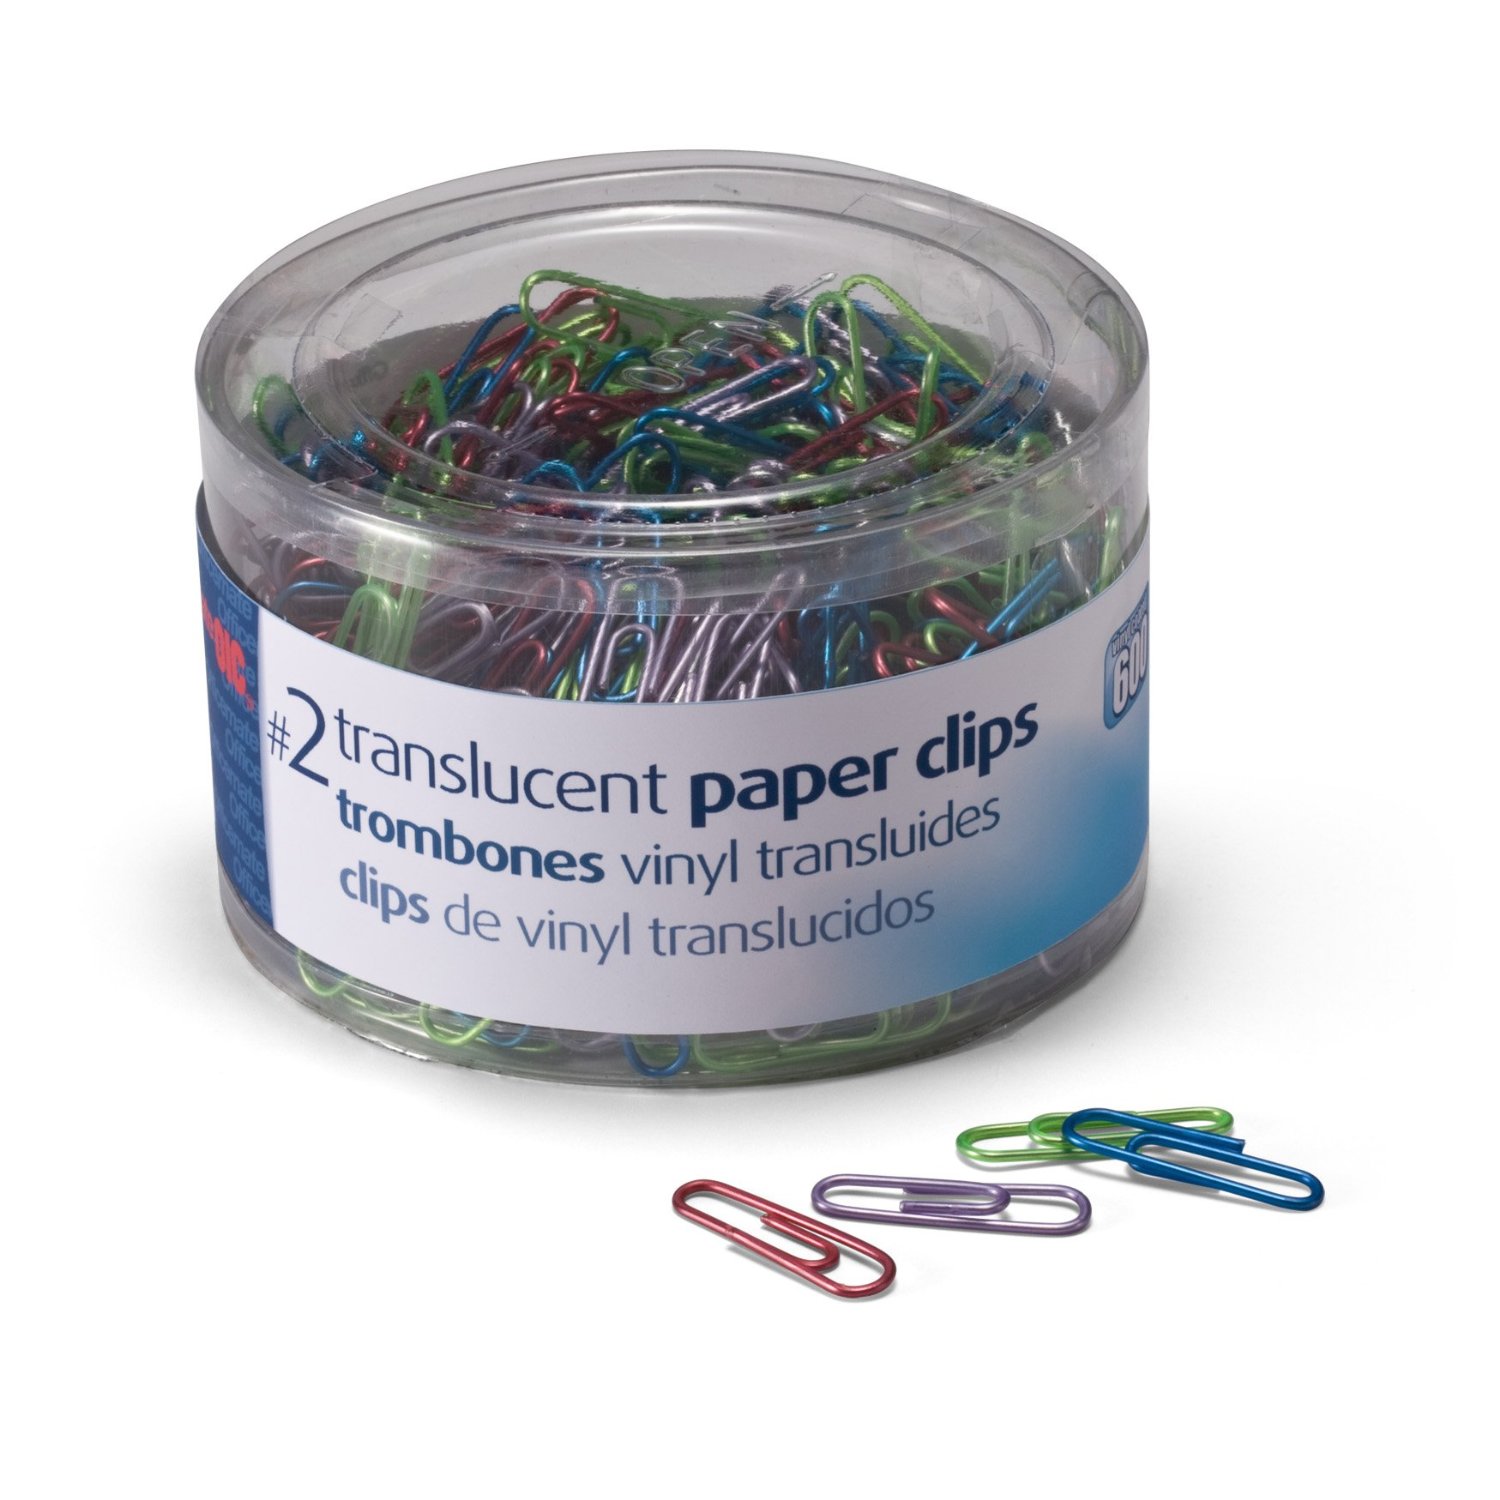 Stylish translucent vinyl clad steel and have extra holding power. Translucent vinyl paper clips won't leave marks on your paper. 